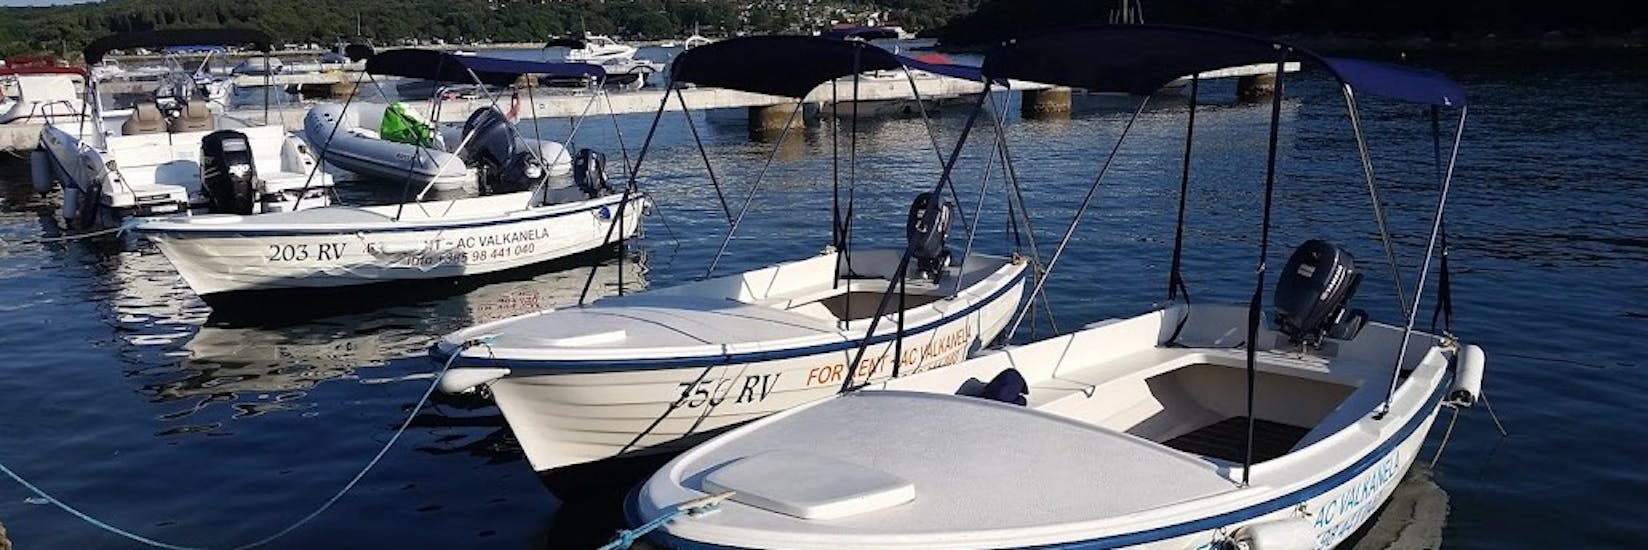 Picture of the boat from Vrsar boat rental (up to 6 people) with Lux Rent A Boat & Jet Ski Vrsar.